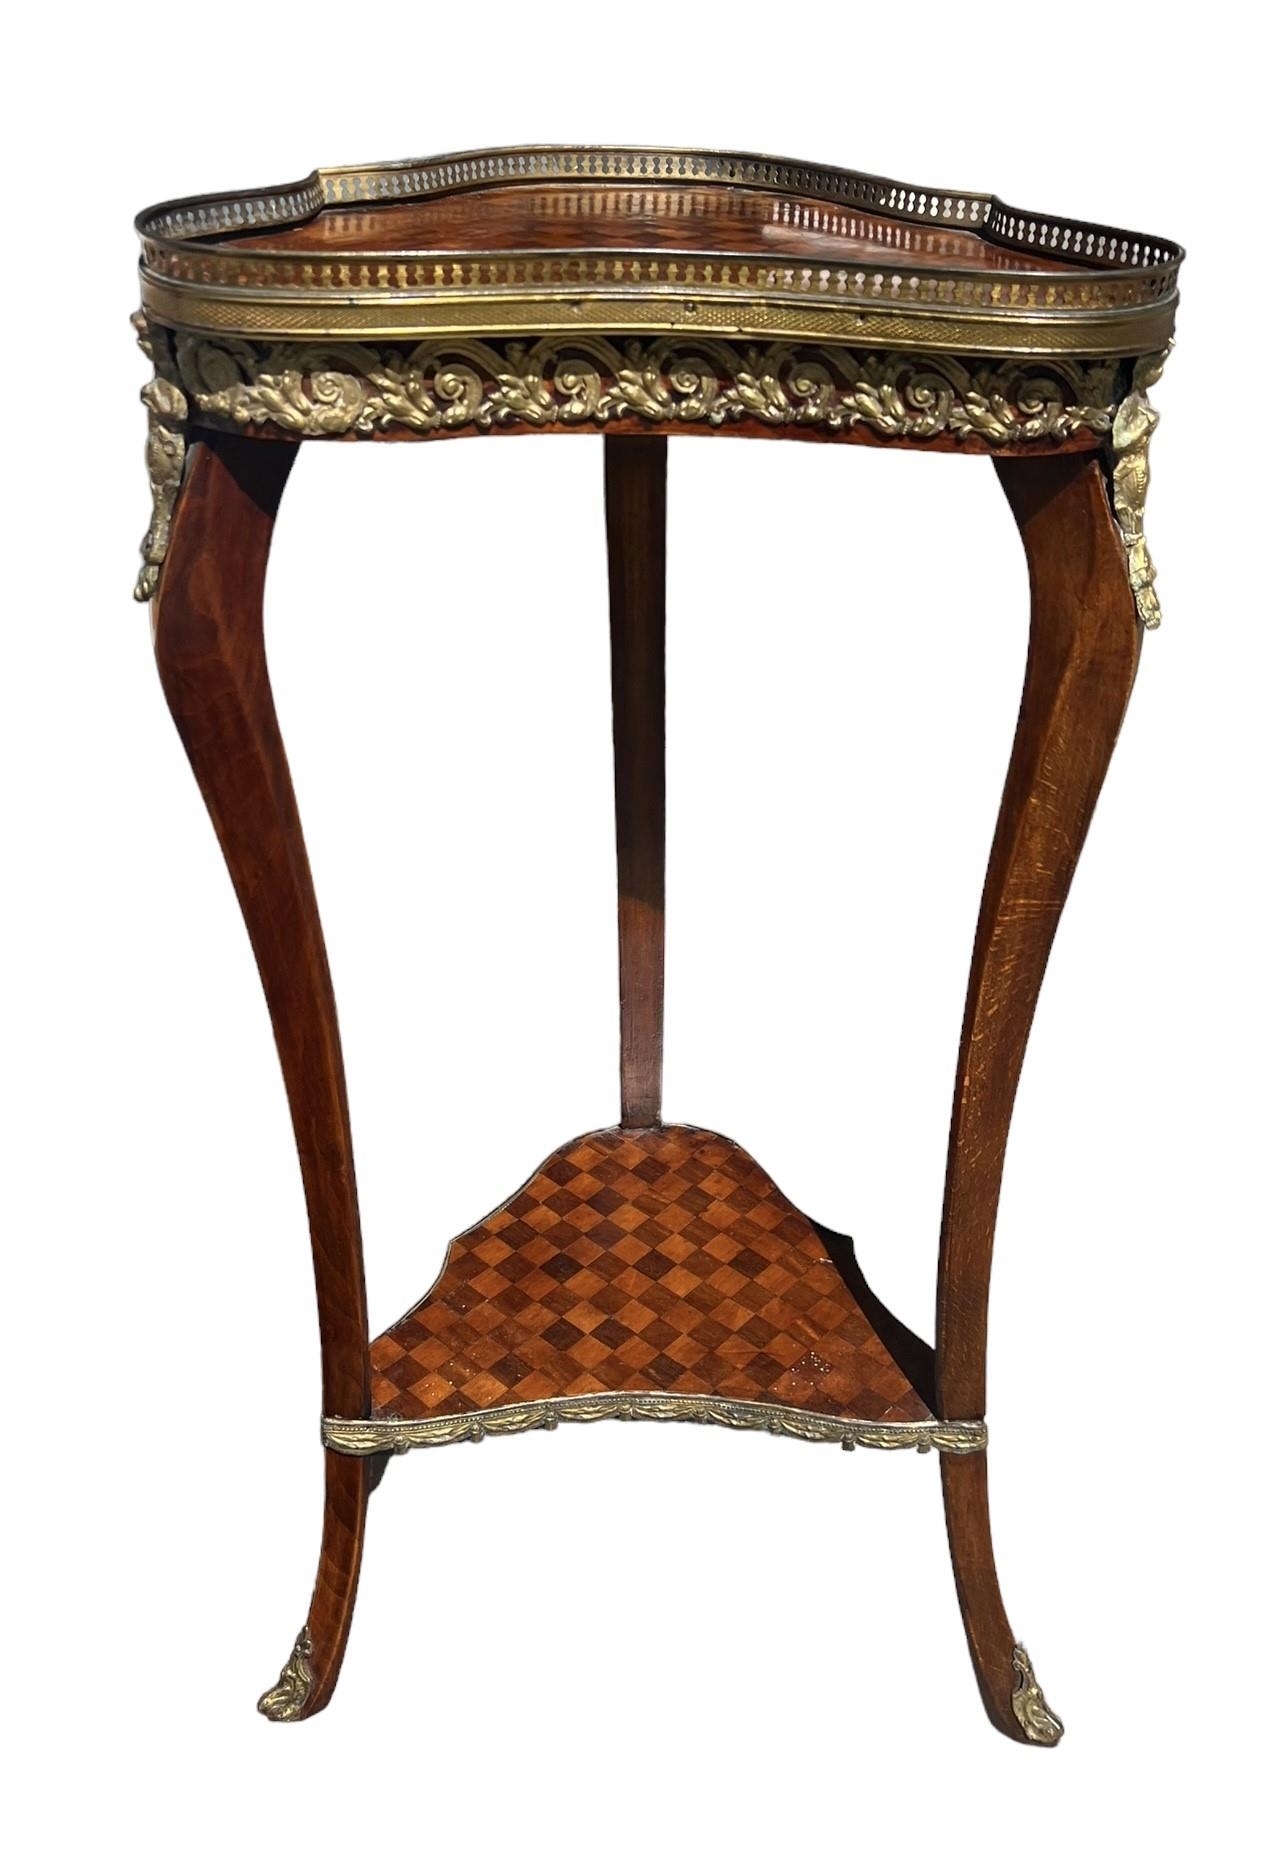 A LOUIS XVI DESIGN FRUITWOOD AND GILT METAL MOUNTED TWO TIER OCCASIONAL TABLE. (h 81cm x d 28.5cm